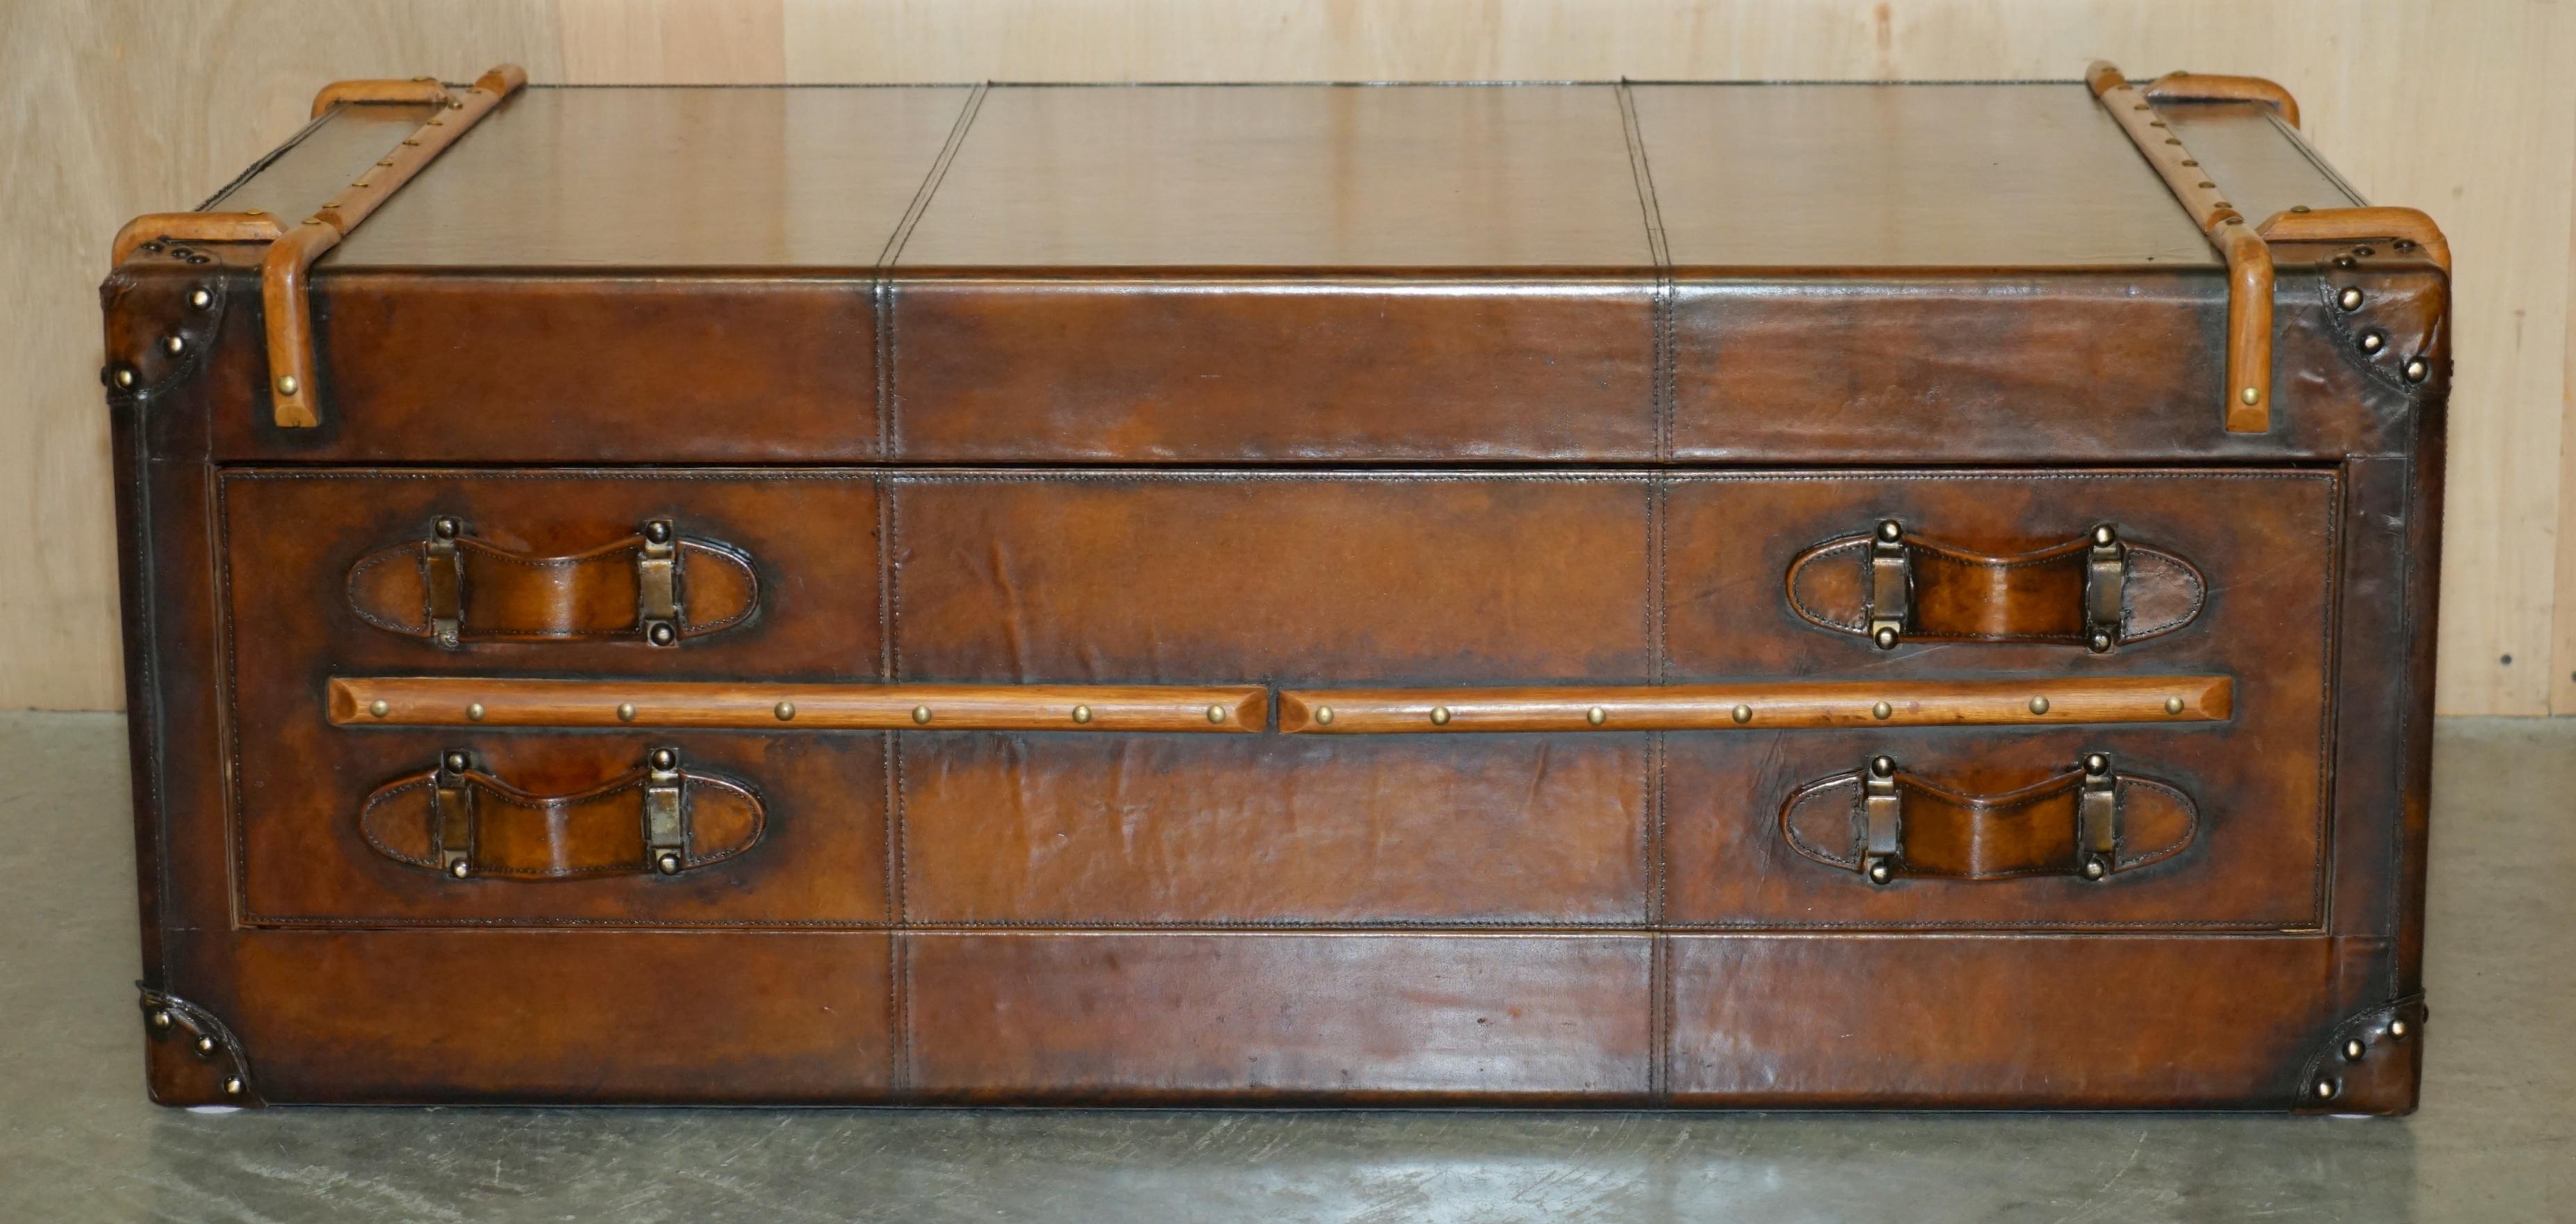 Victorian FULLY RESTORED ViNTAGE HAND DYED BROWN LEATHER STEAMER TRUNK COFFEE TABLE DRAWER